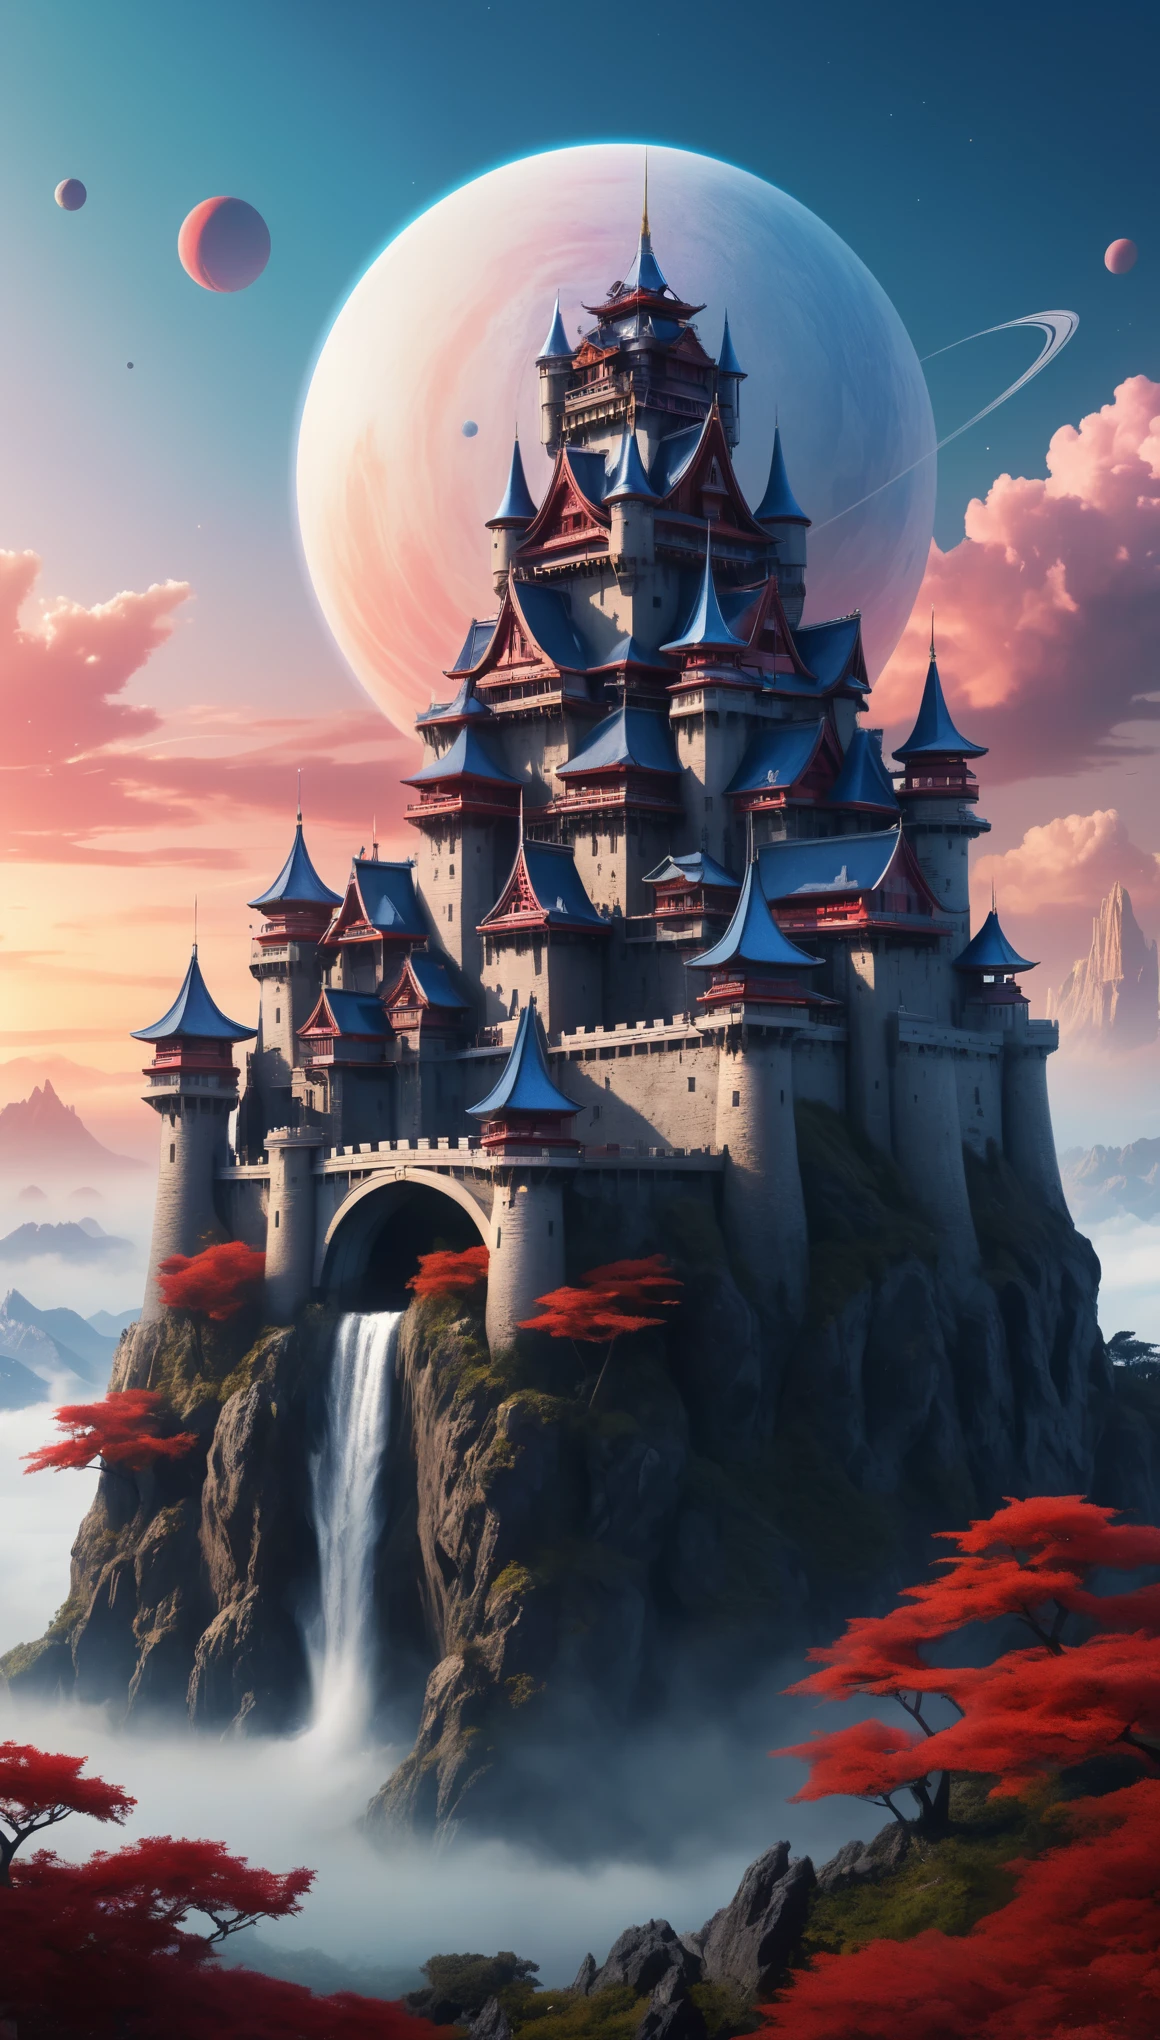 (best quality,4k,8k,highres,masterpiece:1.2),ultra-detailed,(realistic,photorealistic,photo-realistic:1.37), A dream castle, a mythical Japanese-style castle in a sci-fi world, (white, red, blue, black) wallls and roofs, an alien planet, a beautiful and breathtaking view, a beautifully situated castle on the edge of a hill, the colorful sky of an alien planet, strange but beautiful sunset, modern technology installed around the castle, flying machines in sky